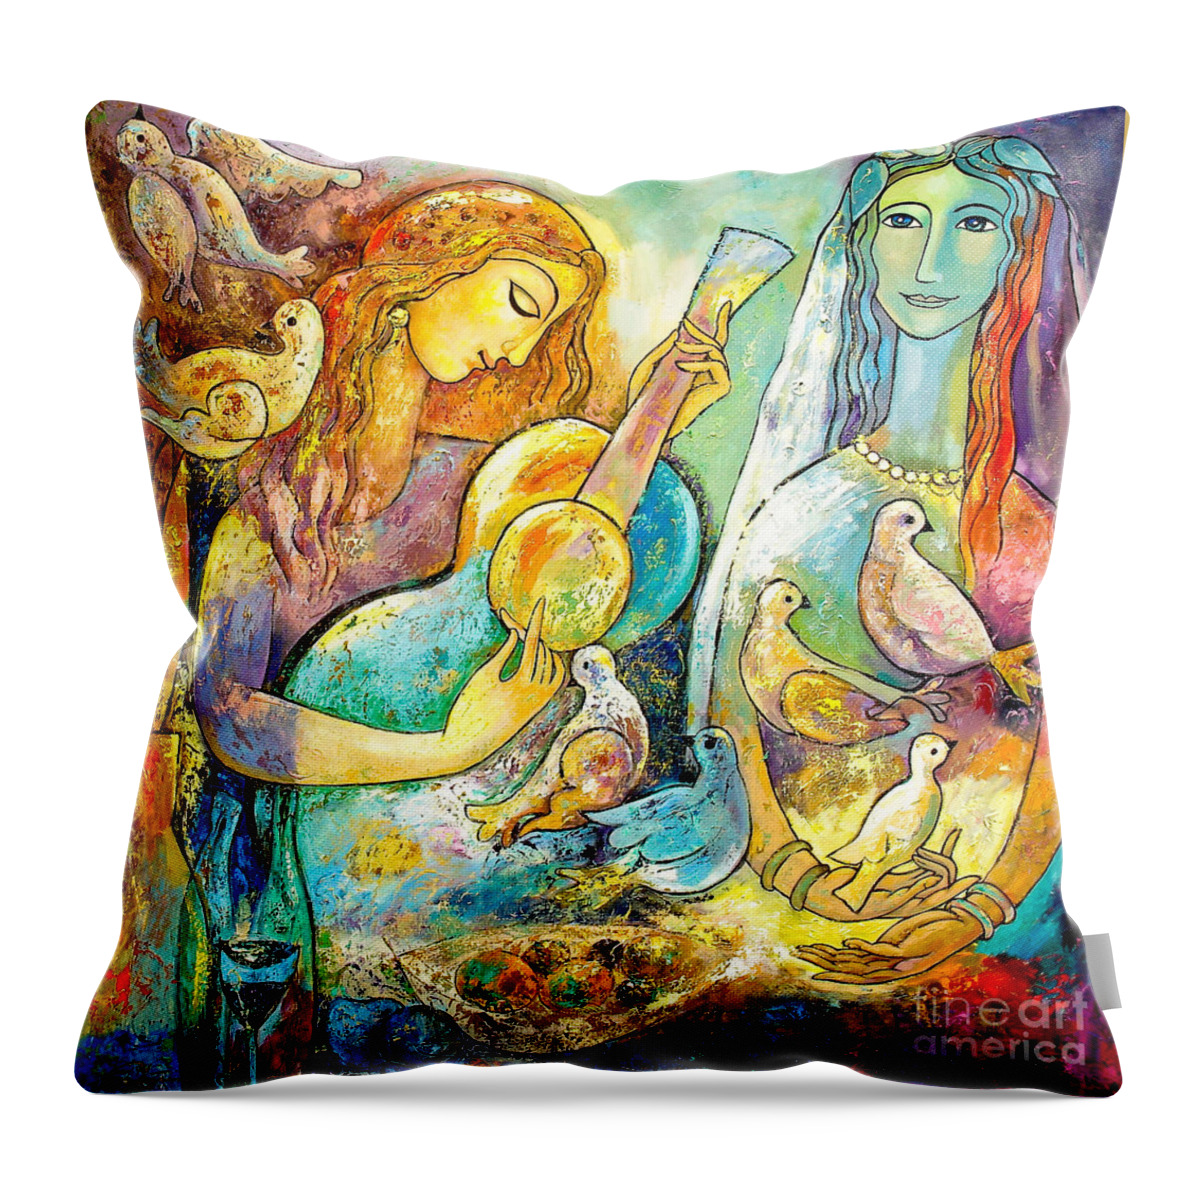 Portrait Throw Pillow featuring the painting Serenade by Shijun Munns